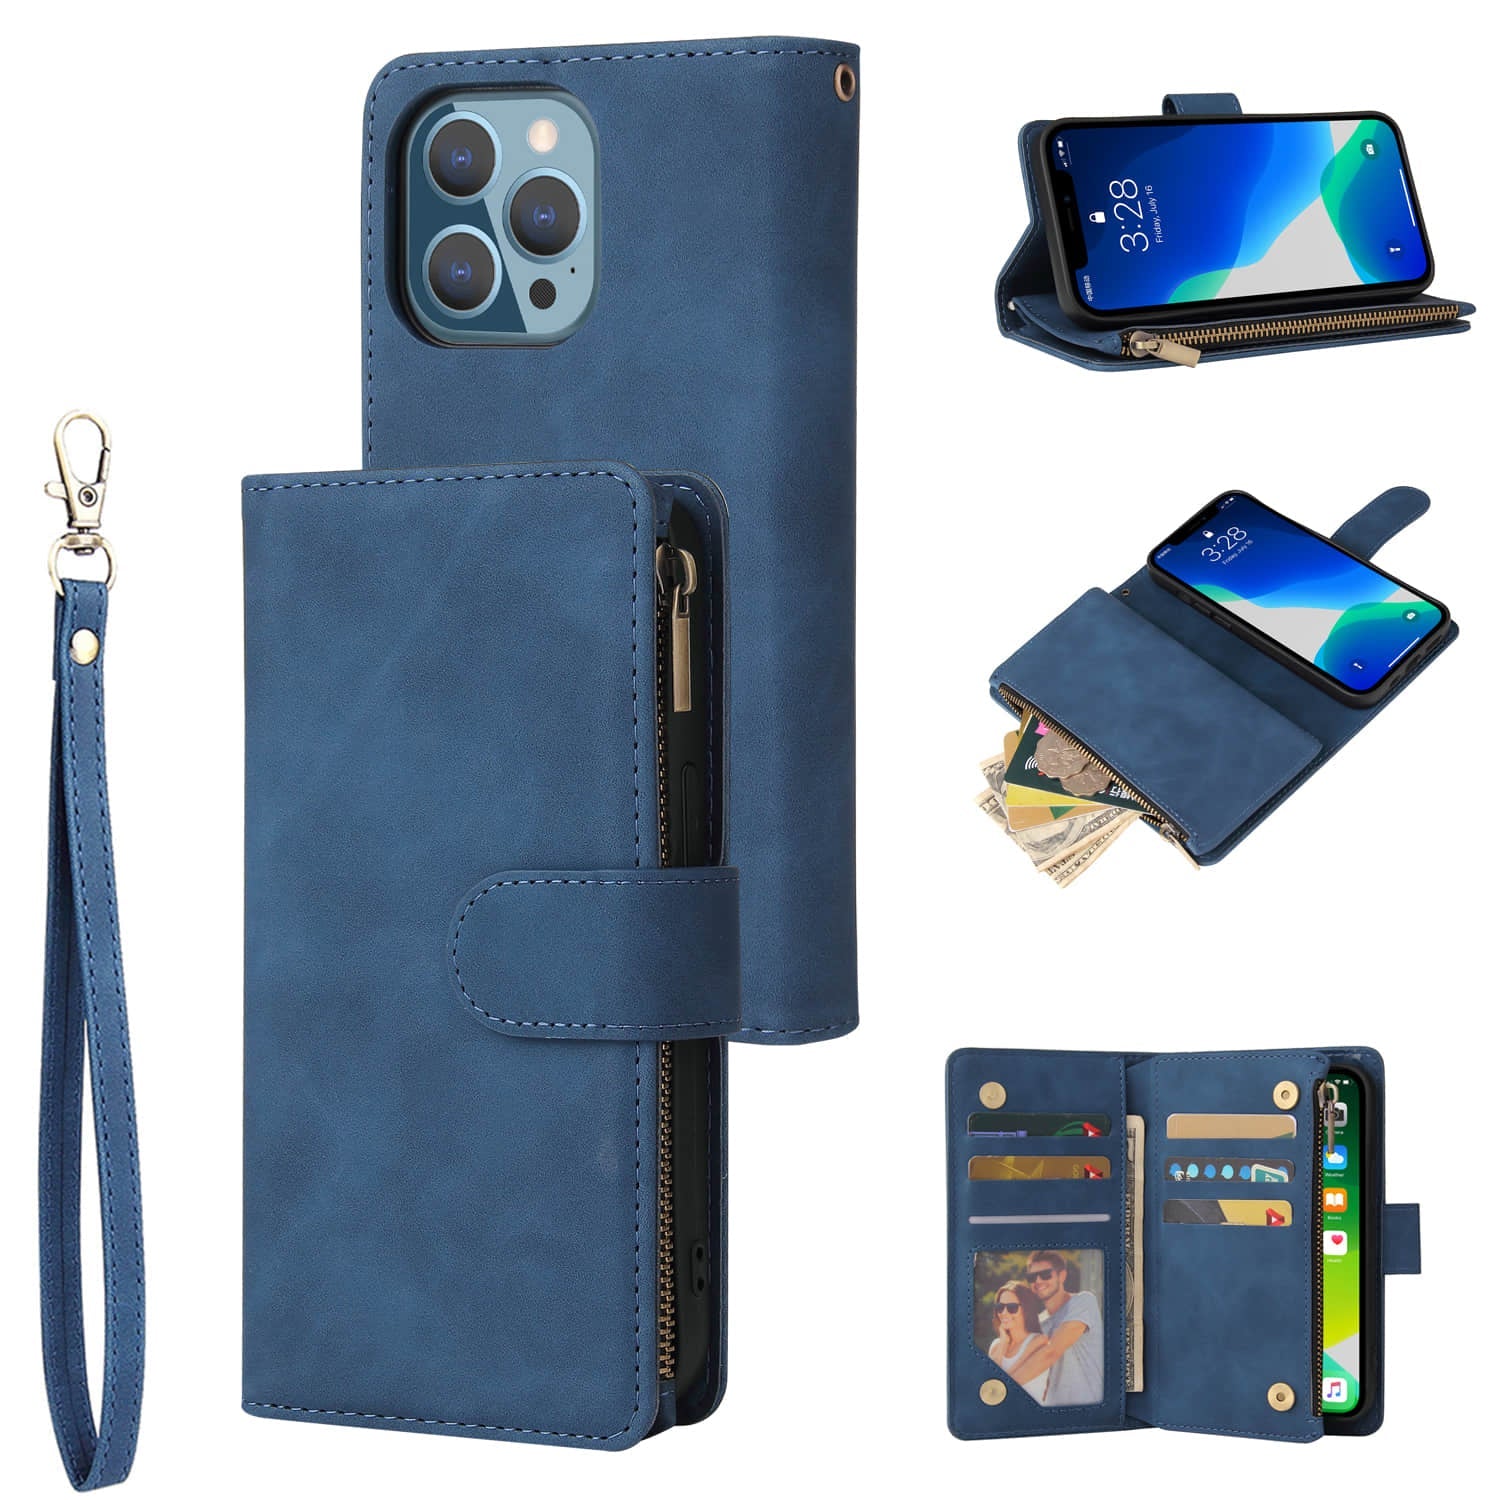 Caeouts Classic Clamshell Phone Case Blue